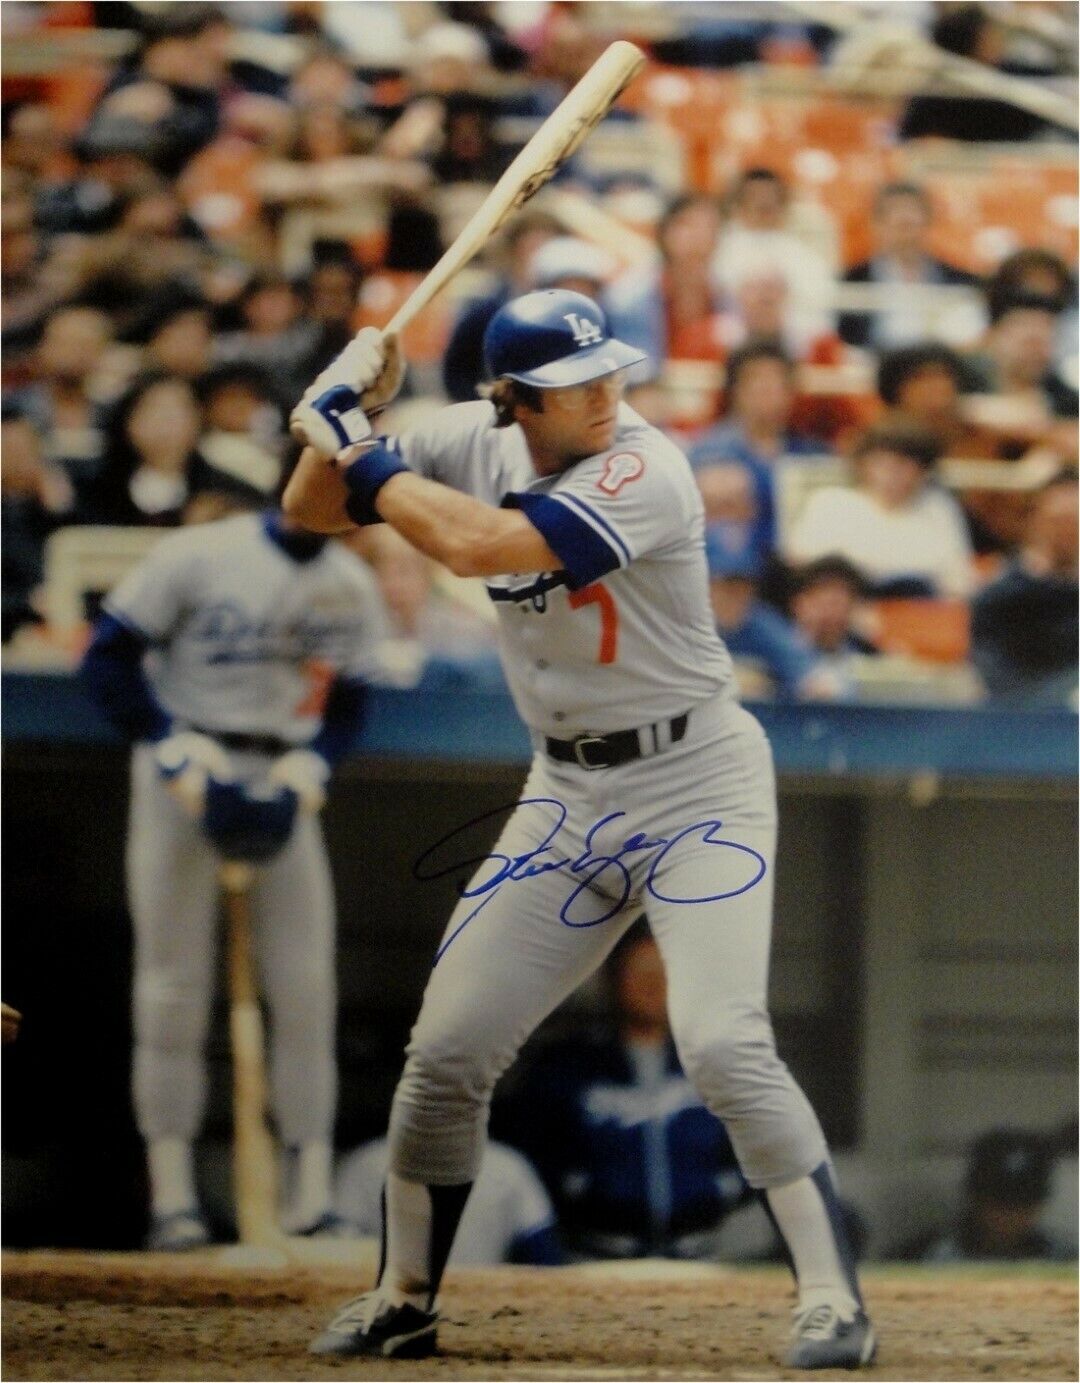 Steve Yeager Hand Signed Autographed 16x20 Photo Poster painting Los Angeles Dodgers Bat In Air